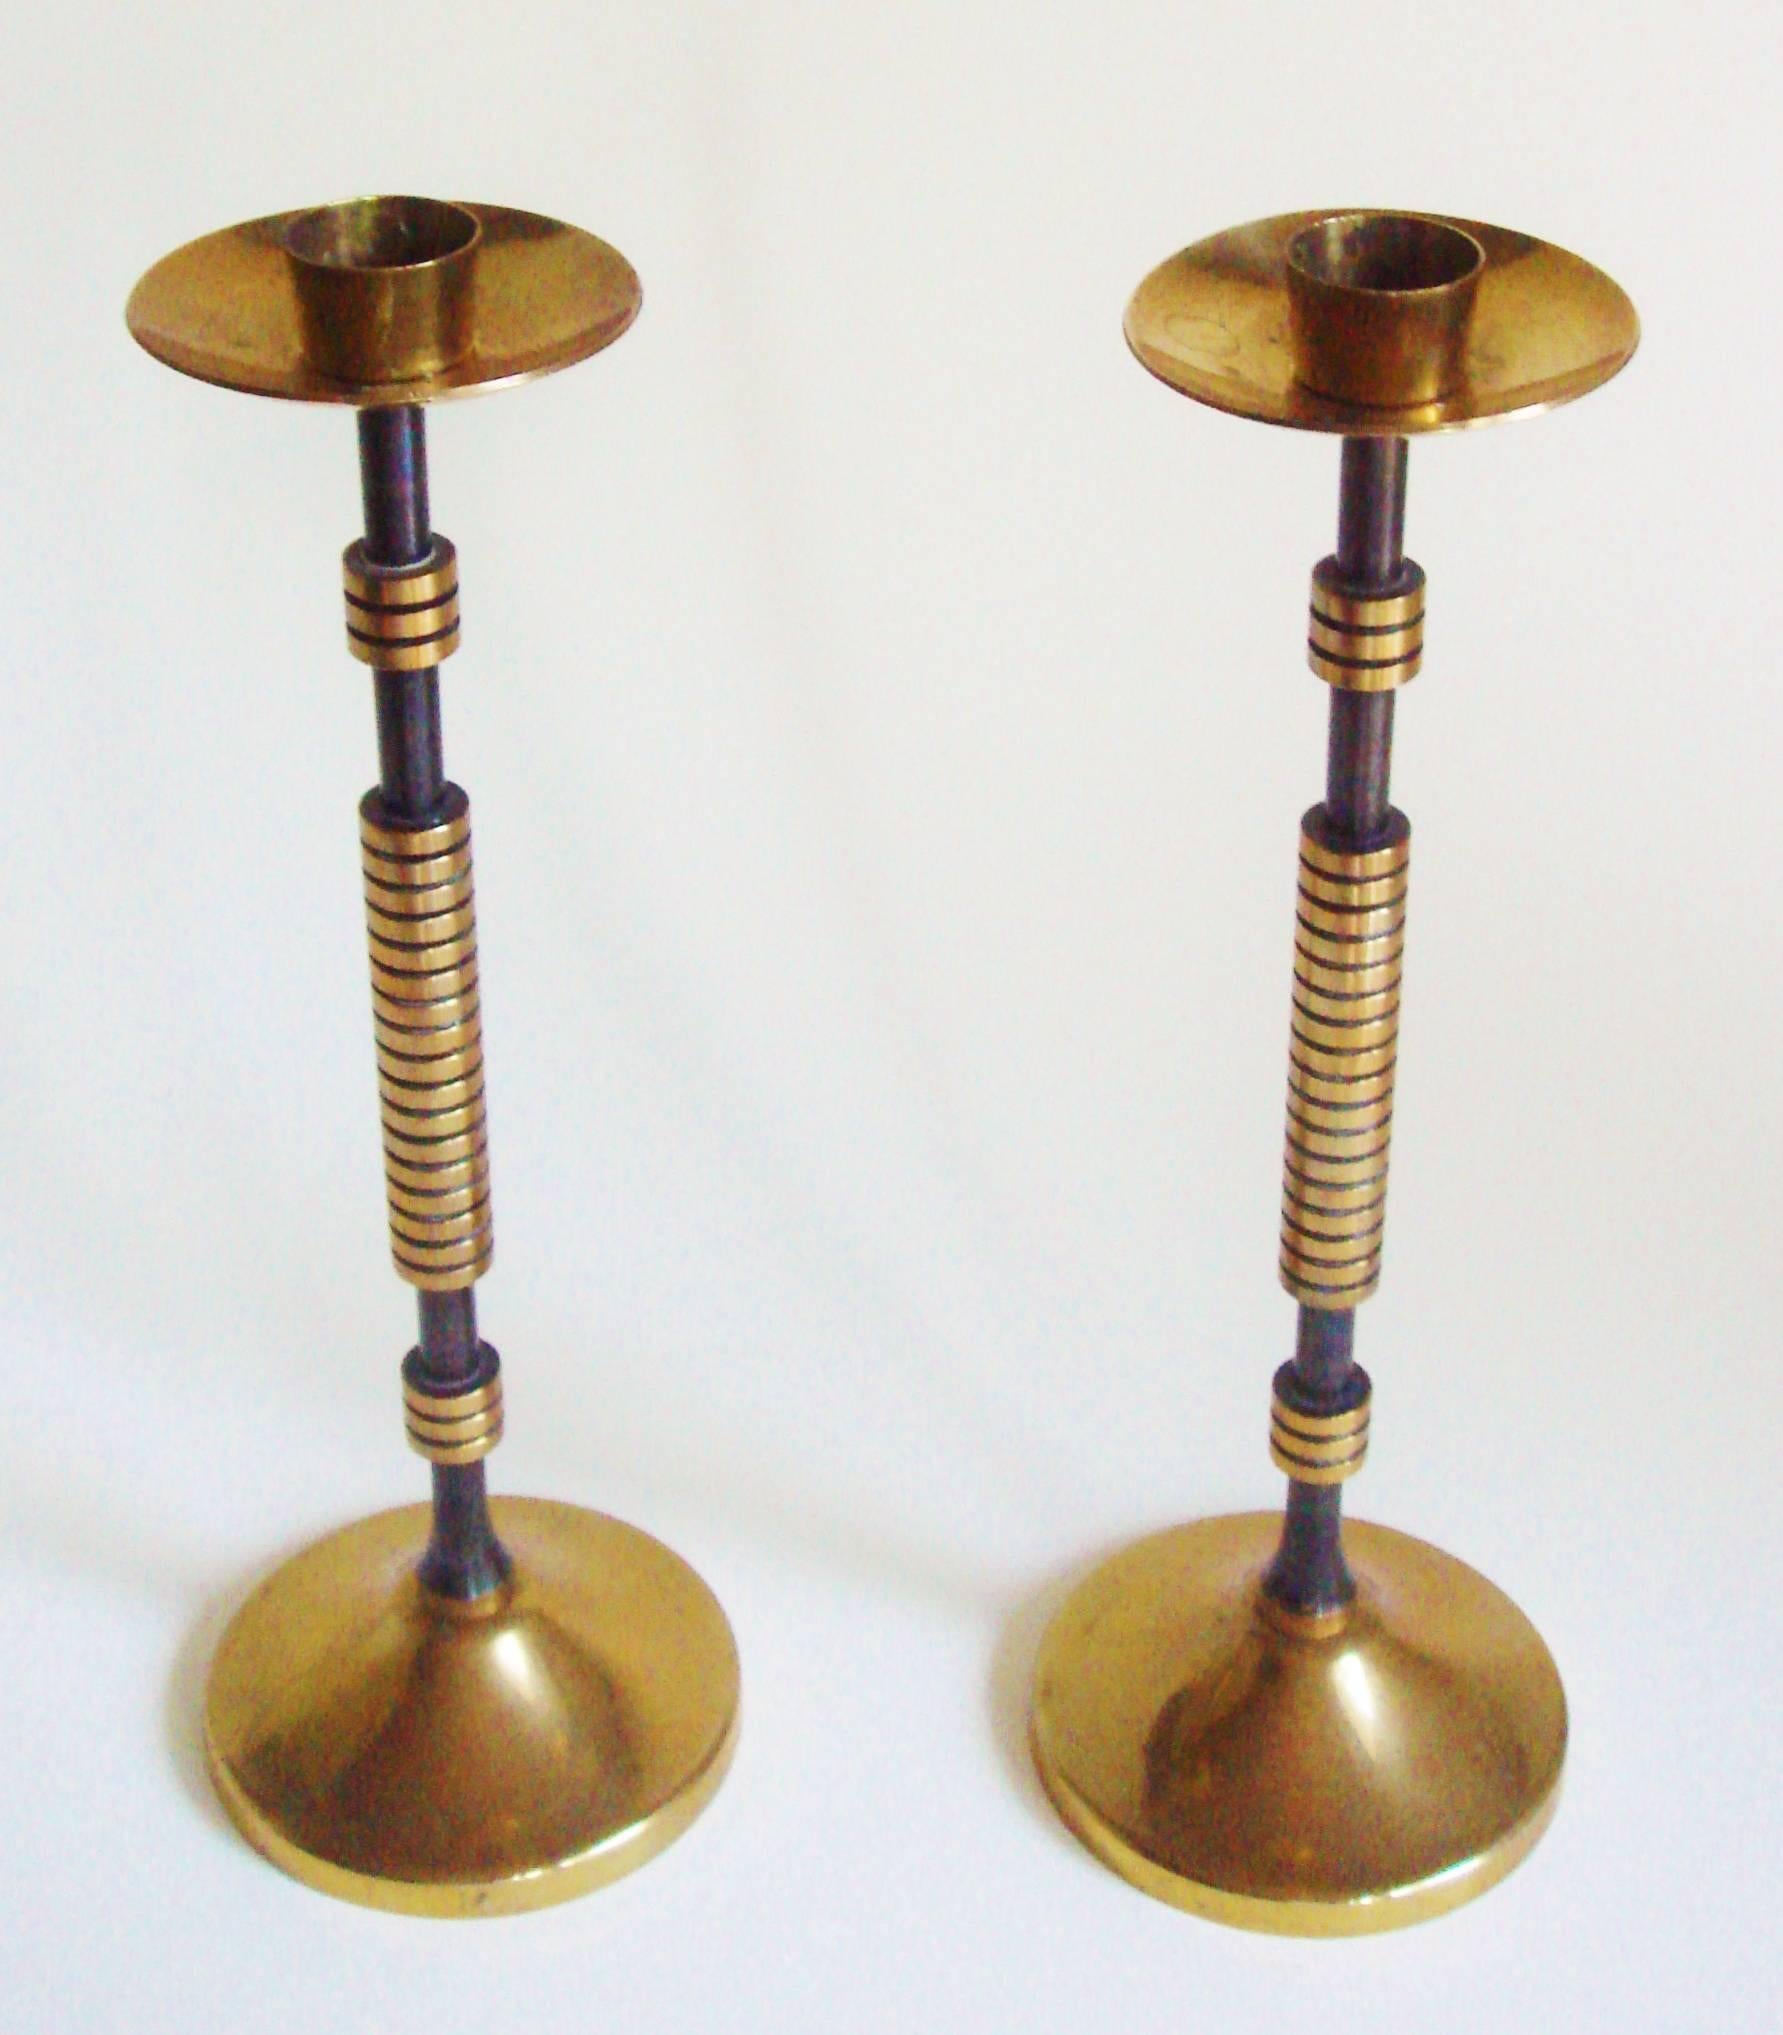 This pair of very elegant and slender French Art Deco or Machine Age brass and black candlesticks feature a black enameled central rod. This rises up from a bell-shaped circular base and culminates in a brass dish-shaped bobeche beneath a brass